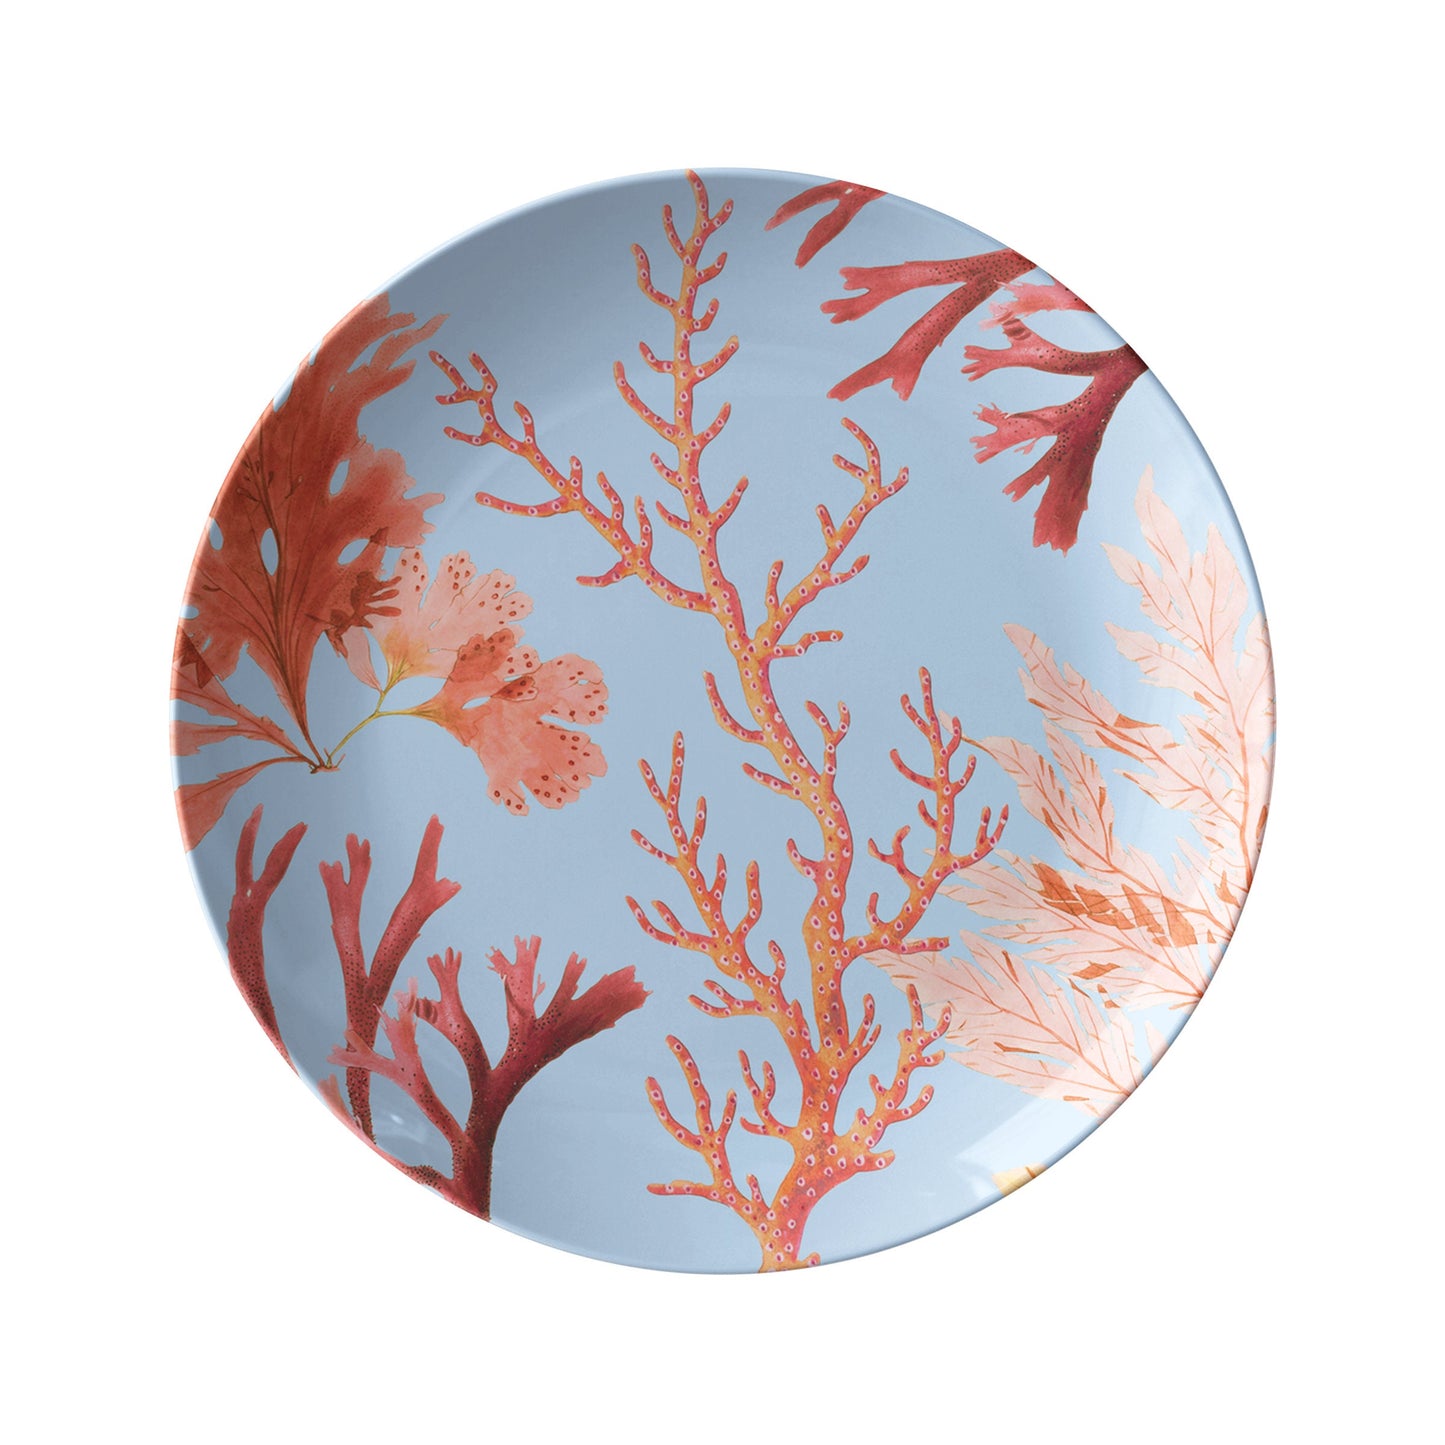 Coral Reef Plates, Set of 4, Sky Blue, Luxury Thermosaf Plastic